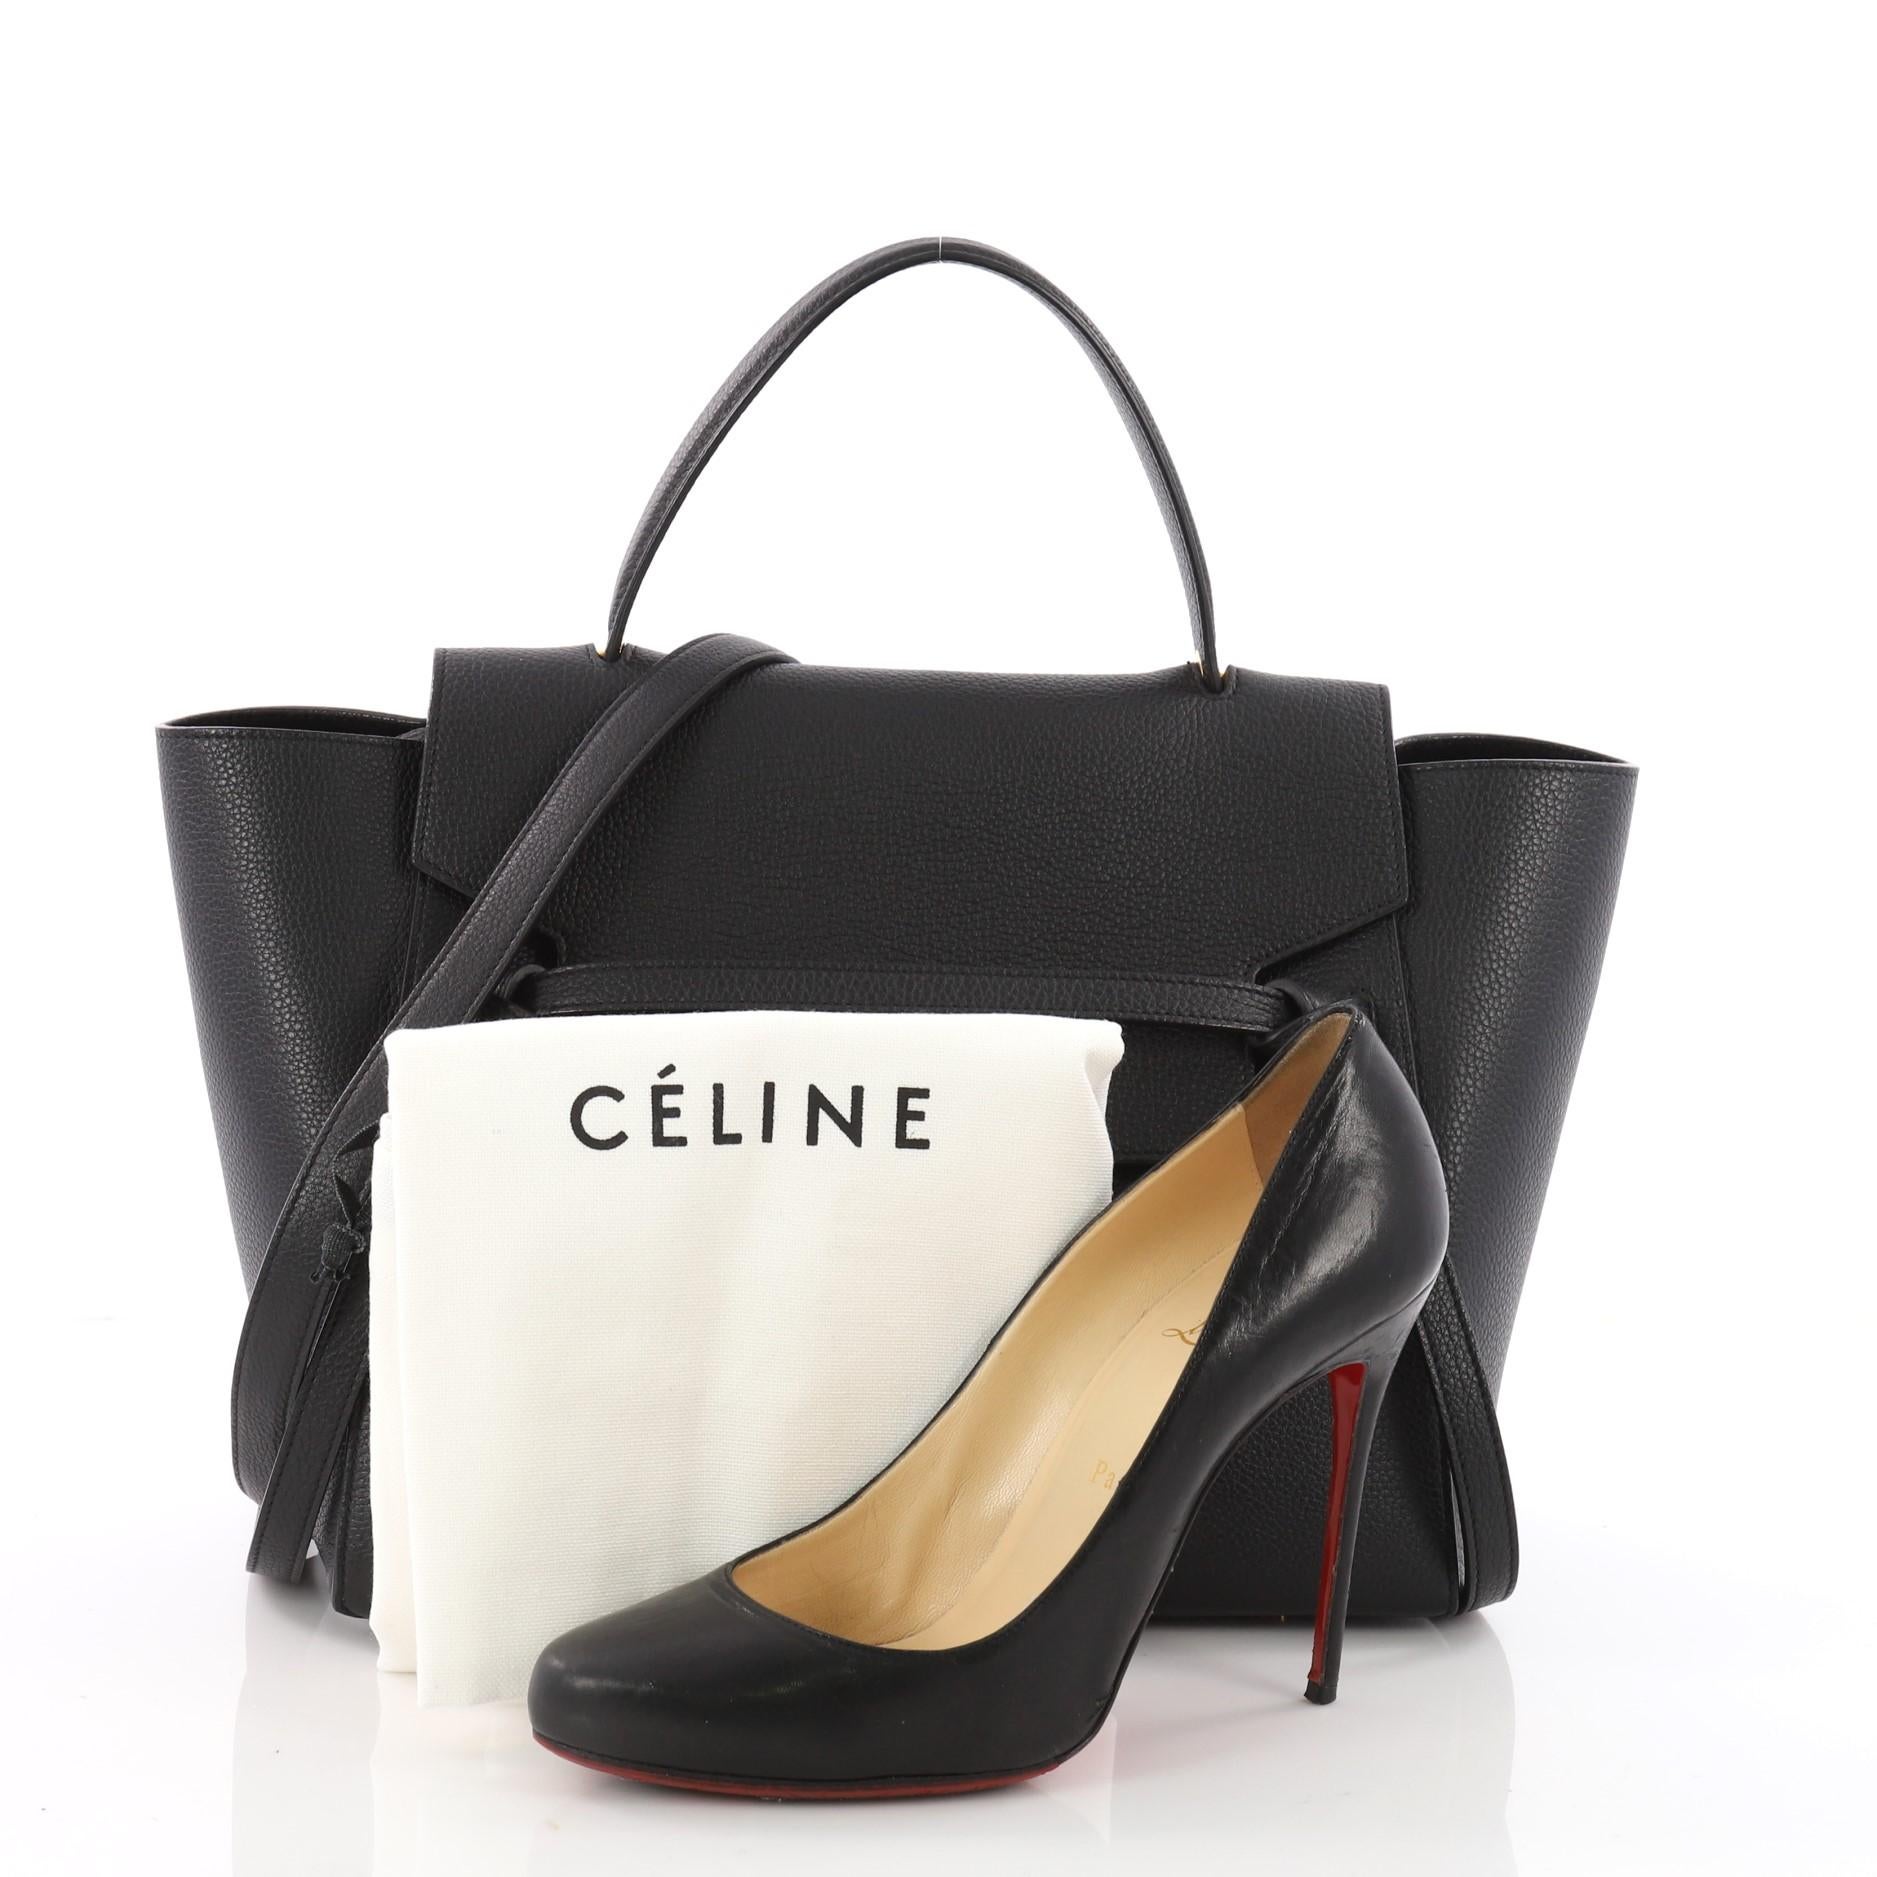 This authentic Celine Belt Bag Grainy Leather Mini is sure to make a statement. Crafted from black grainy leather, this bold and beautiful bag features expanded wings, looped single top handle, top flap slide closure, knotted ties, zipper pocket at